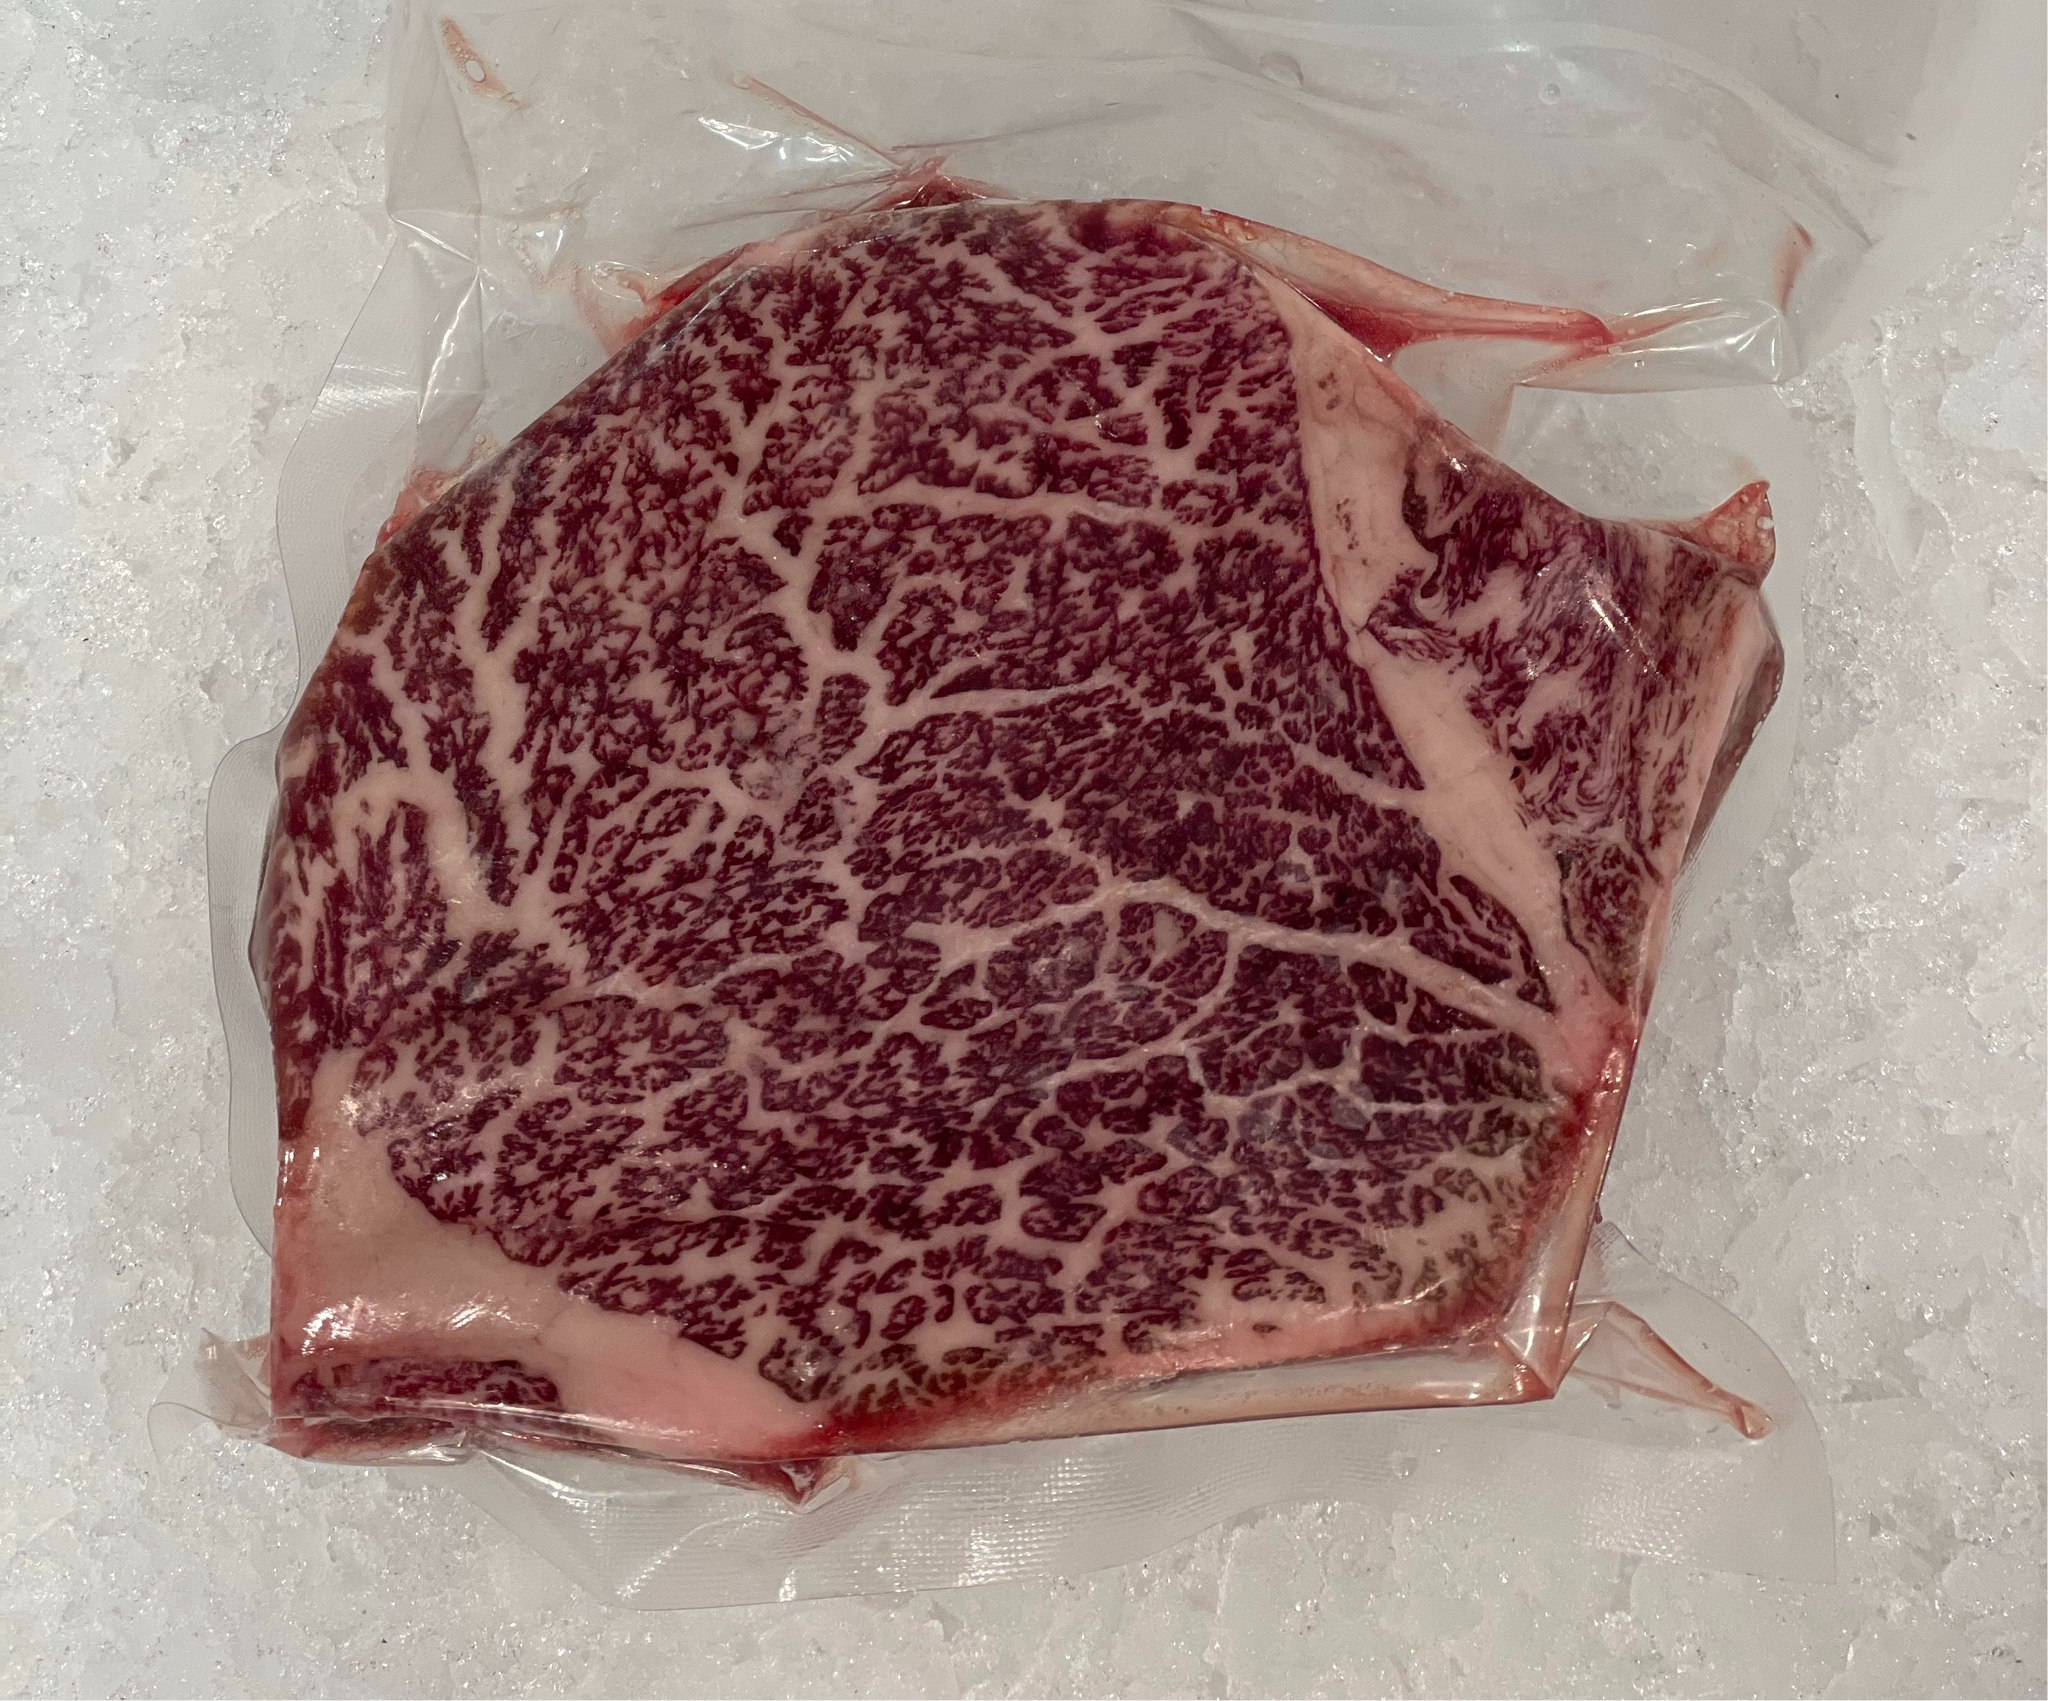 Japanese A5 Wagyu Beef Online